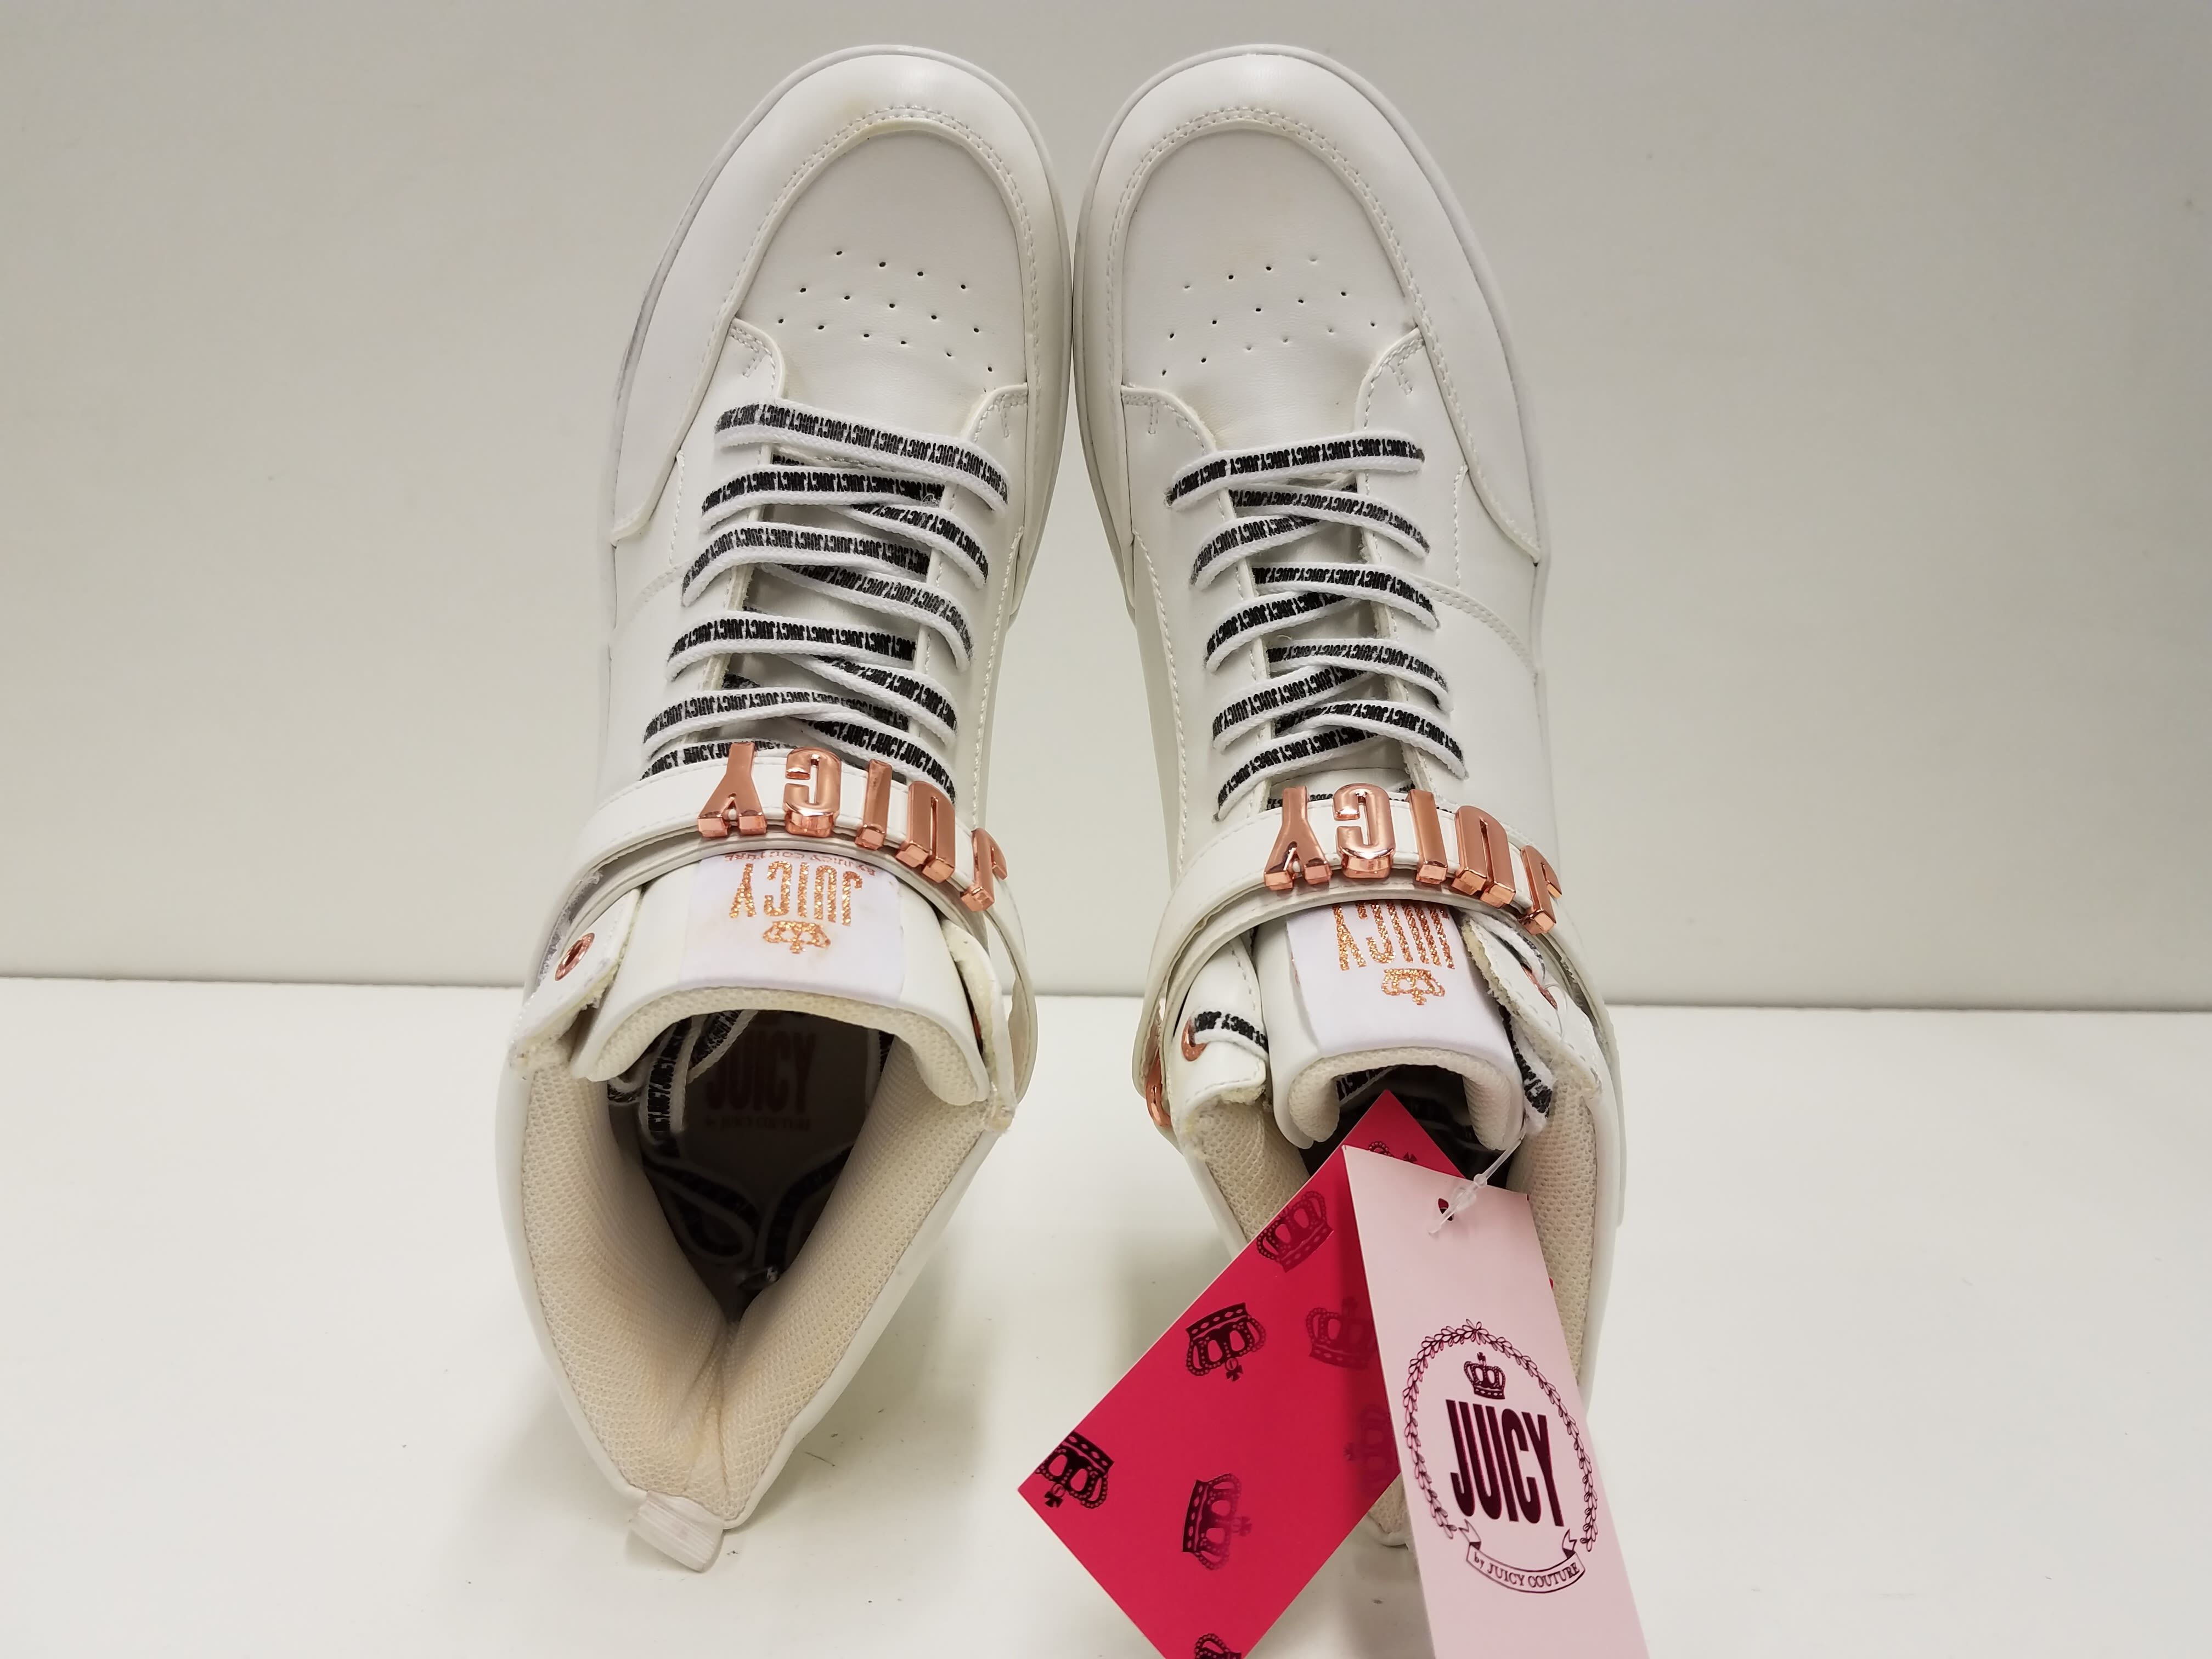 NWT Juicy Couture Studded Logo Strap Fashion Pull On Sneakers